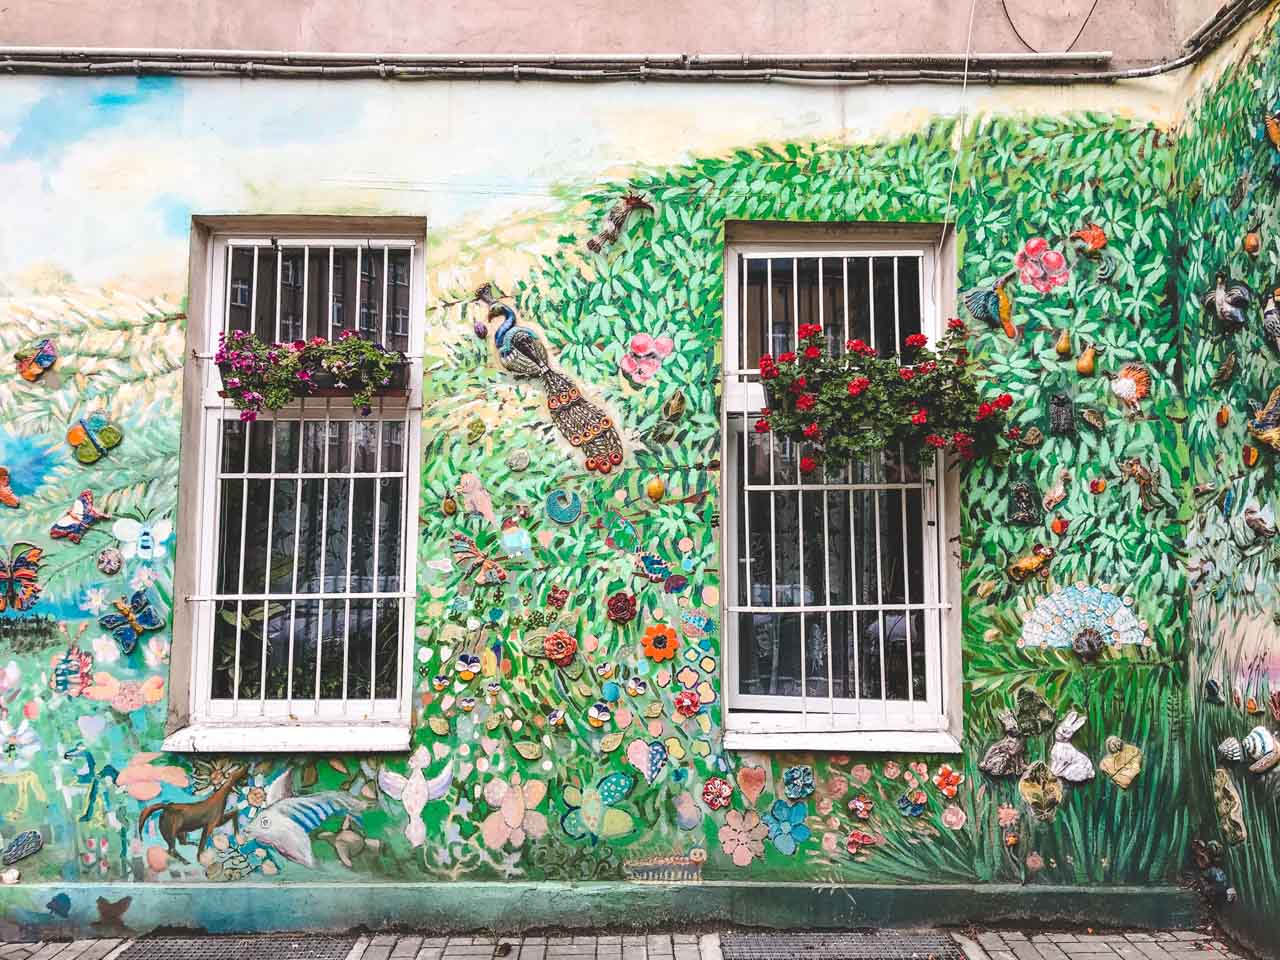 Art installation on the façade of an old tenement house in Wrocław depicting a paradise garden